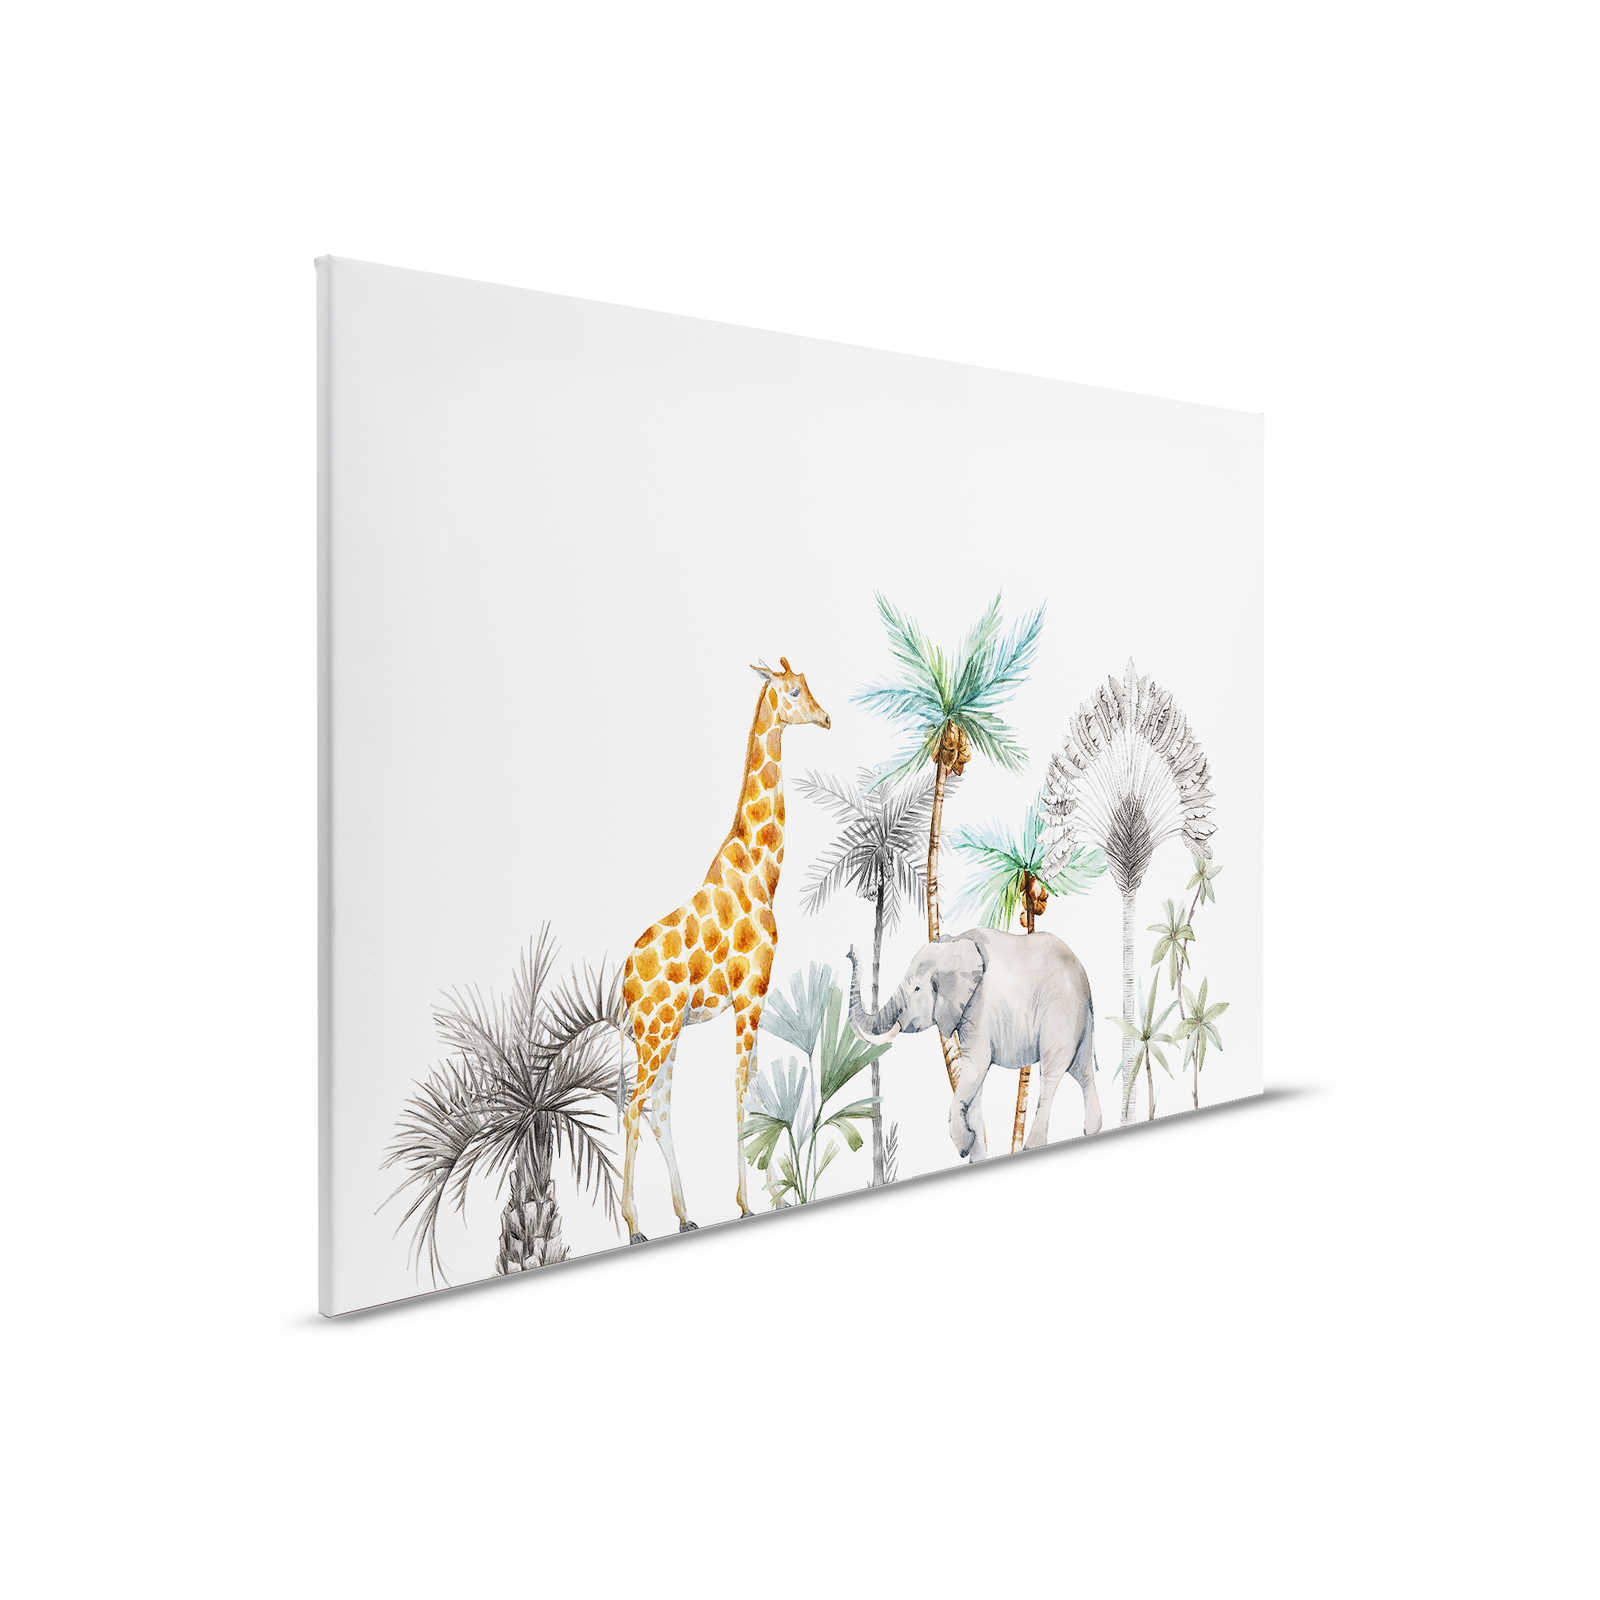         Canvas painting for the children's room with animals and trees - 0.90 m x 0.60 m
    